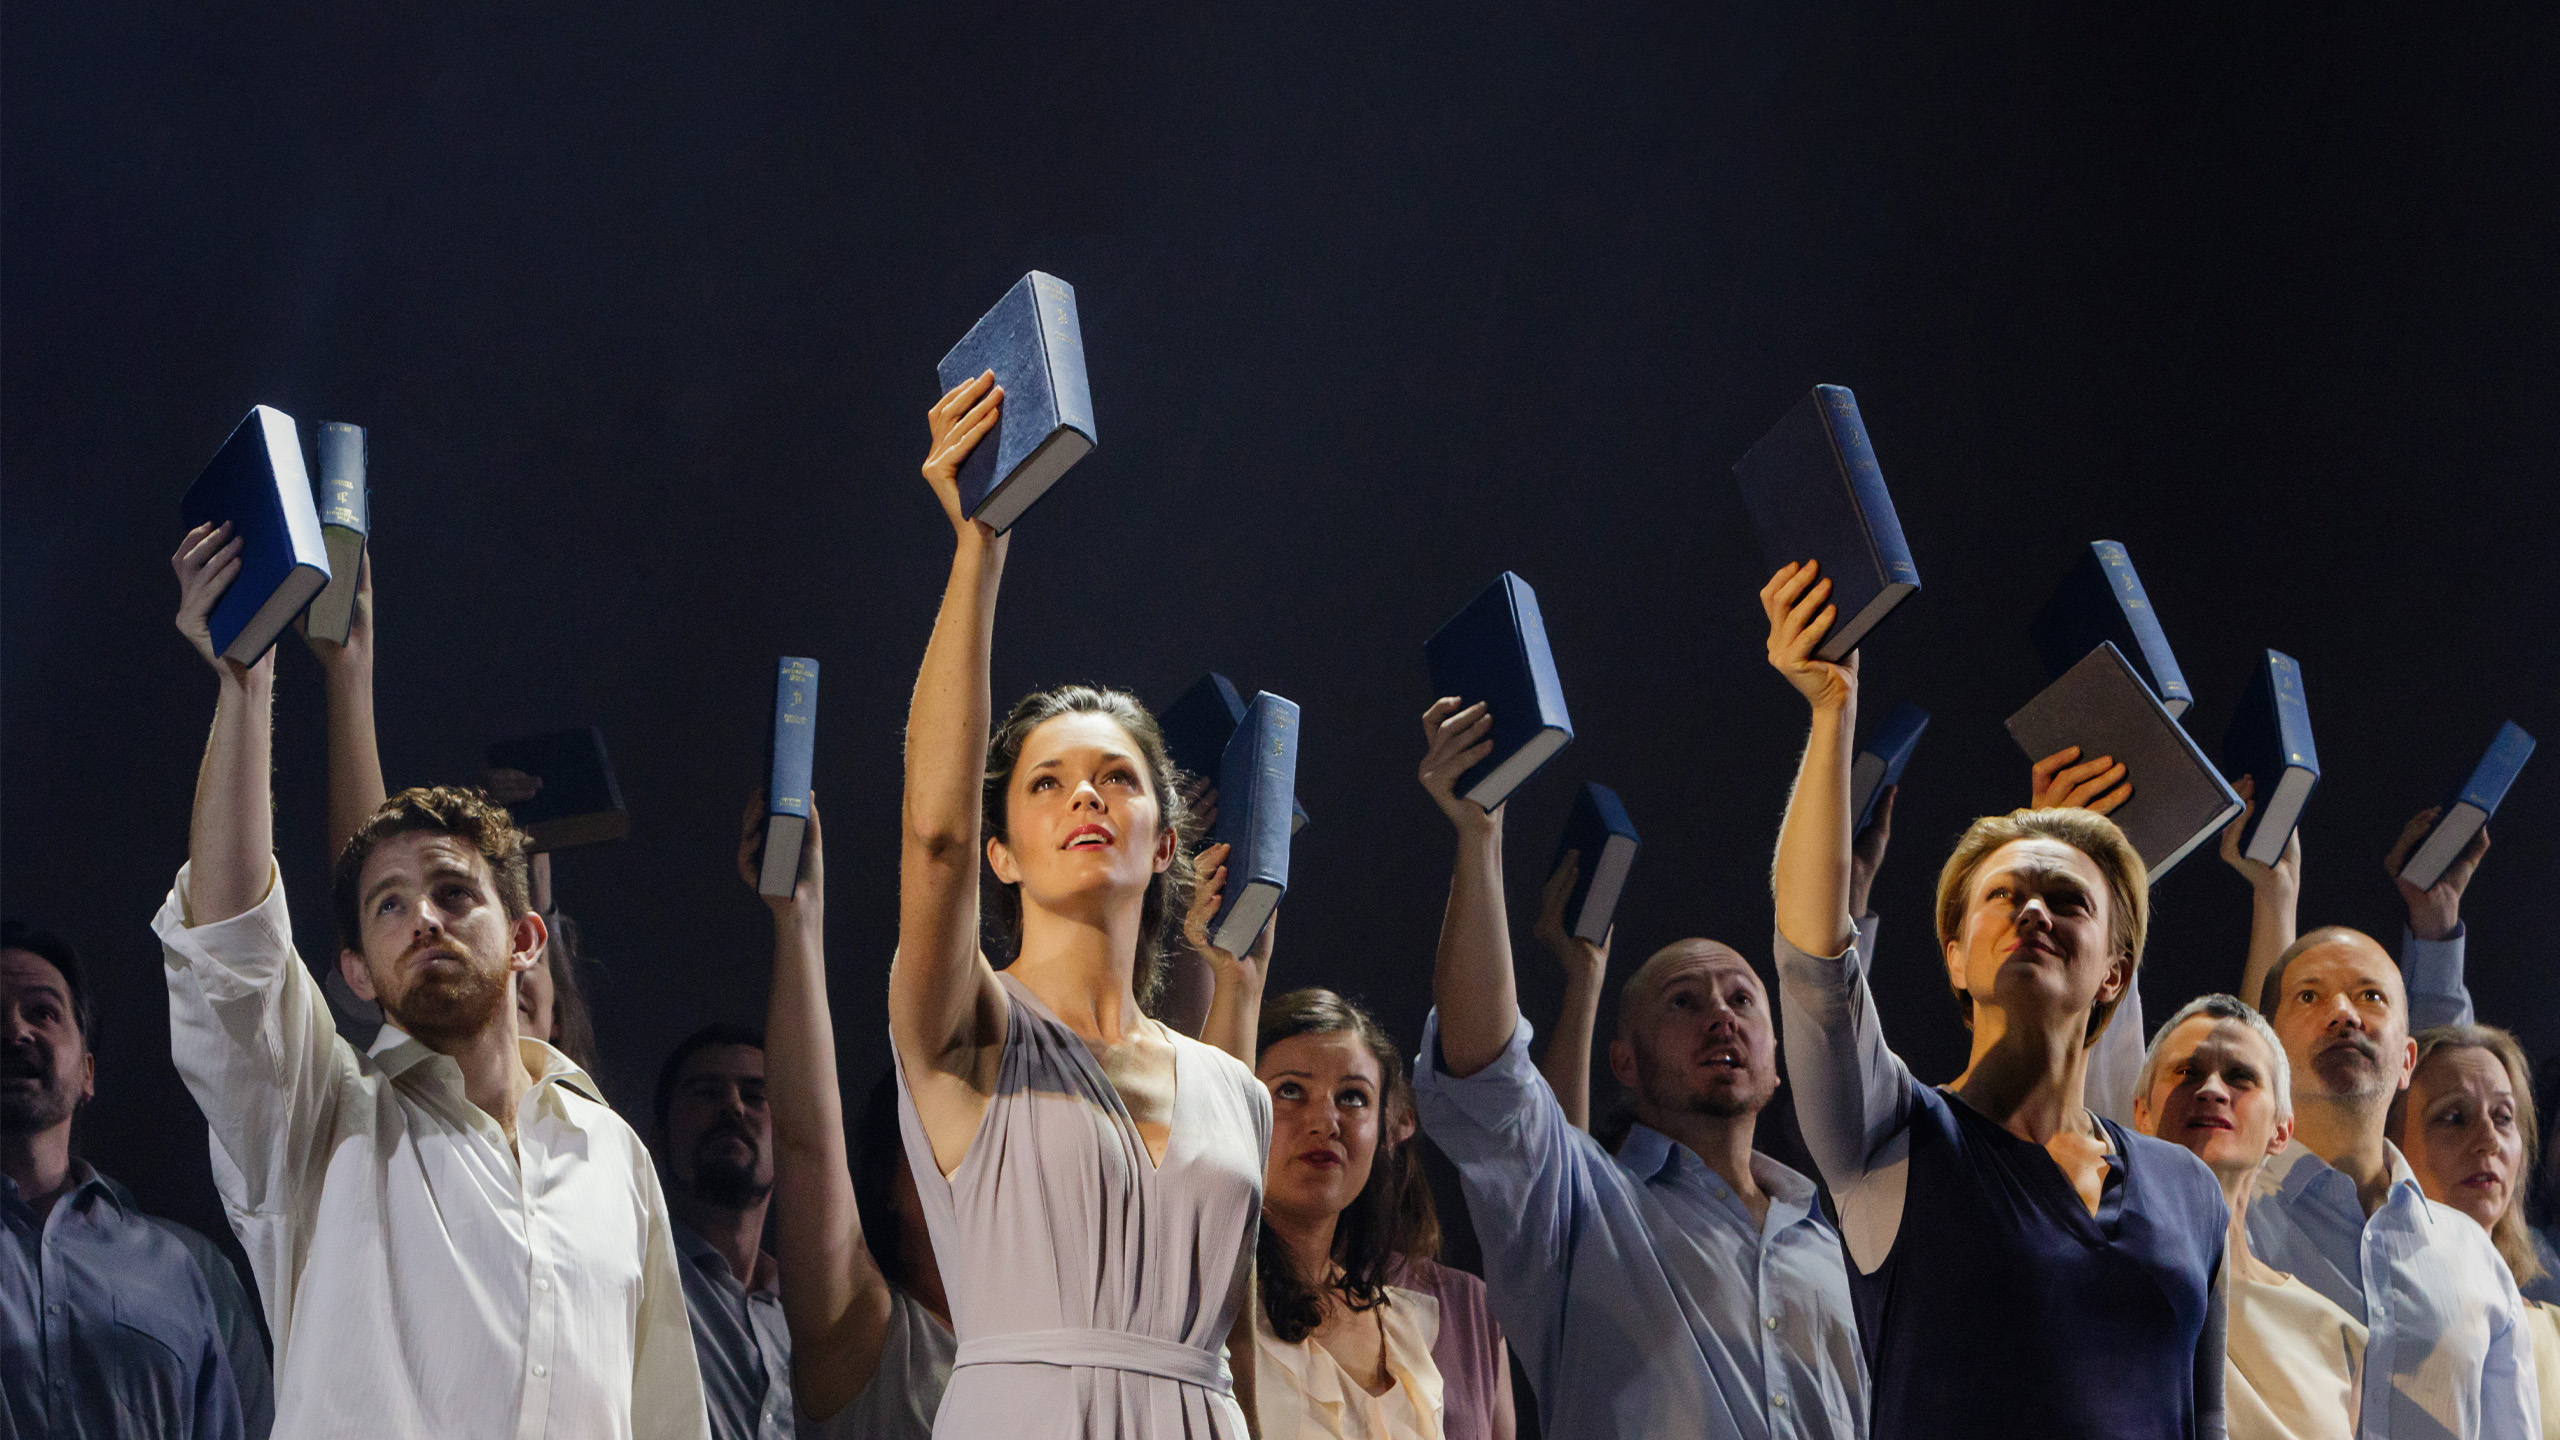 The cast wears neutral outfits, all holding up a book in their right hand